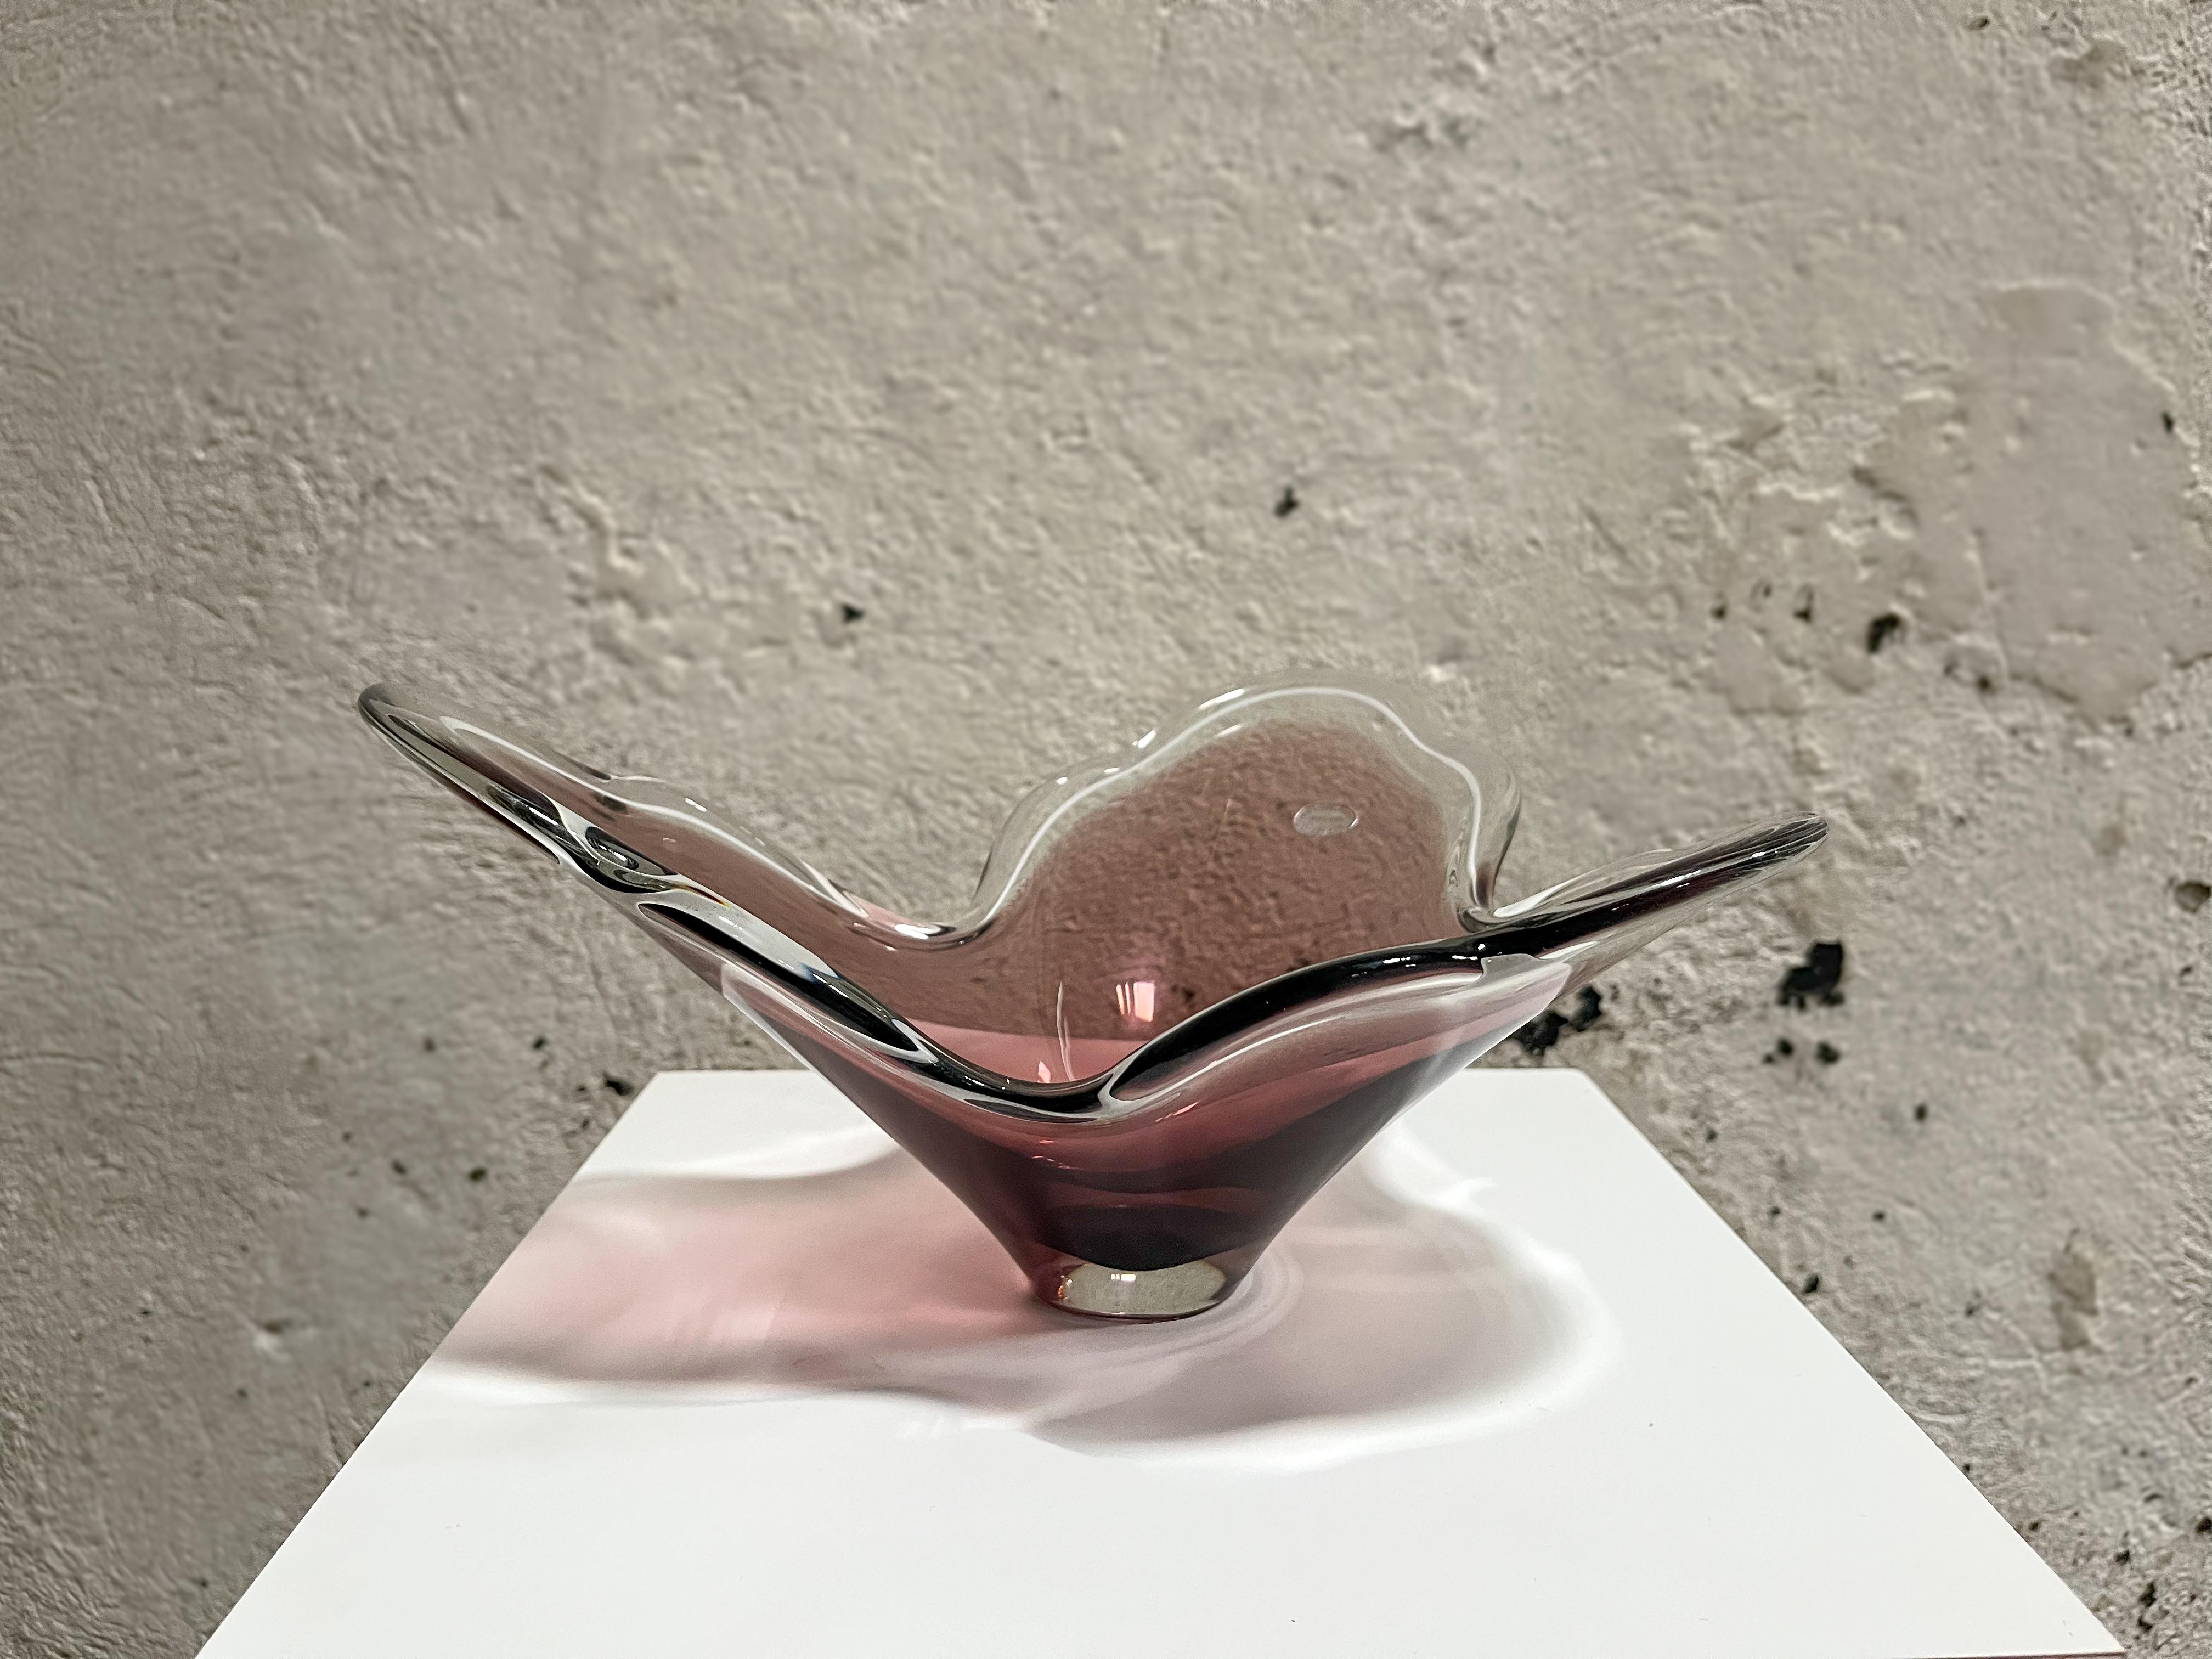 Biomorphic freeform leaf-like ruffled edge lead crystal cased bowl by FA. W. Johansson for Orrefors glassworks.  Dusty with a brownish-pinkish cast - cased in clear crystal<br />
<br />
Engraved 